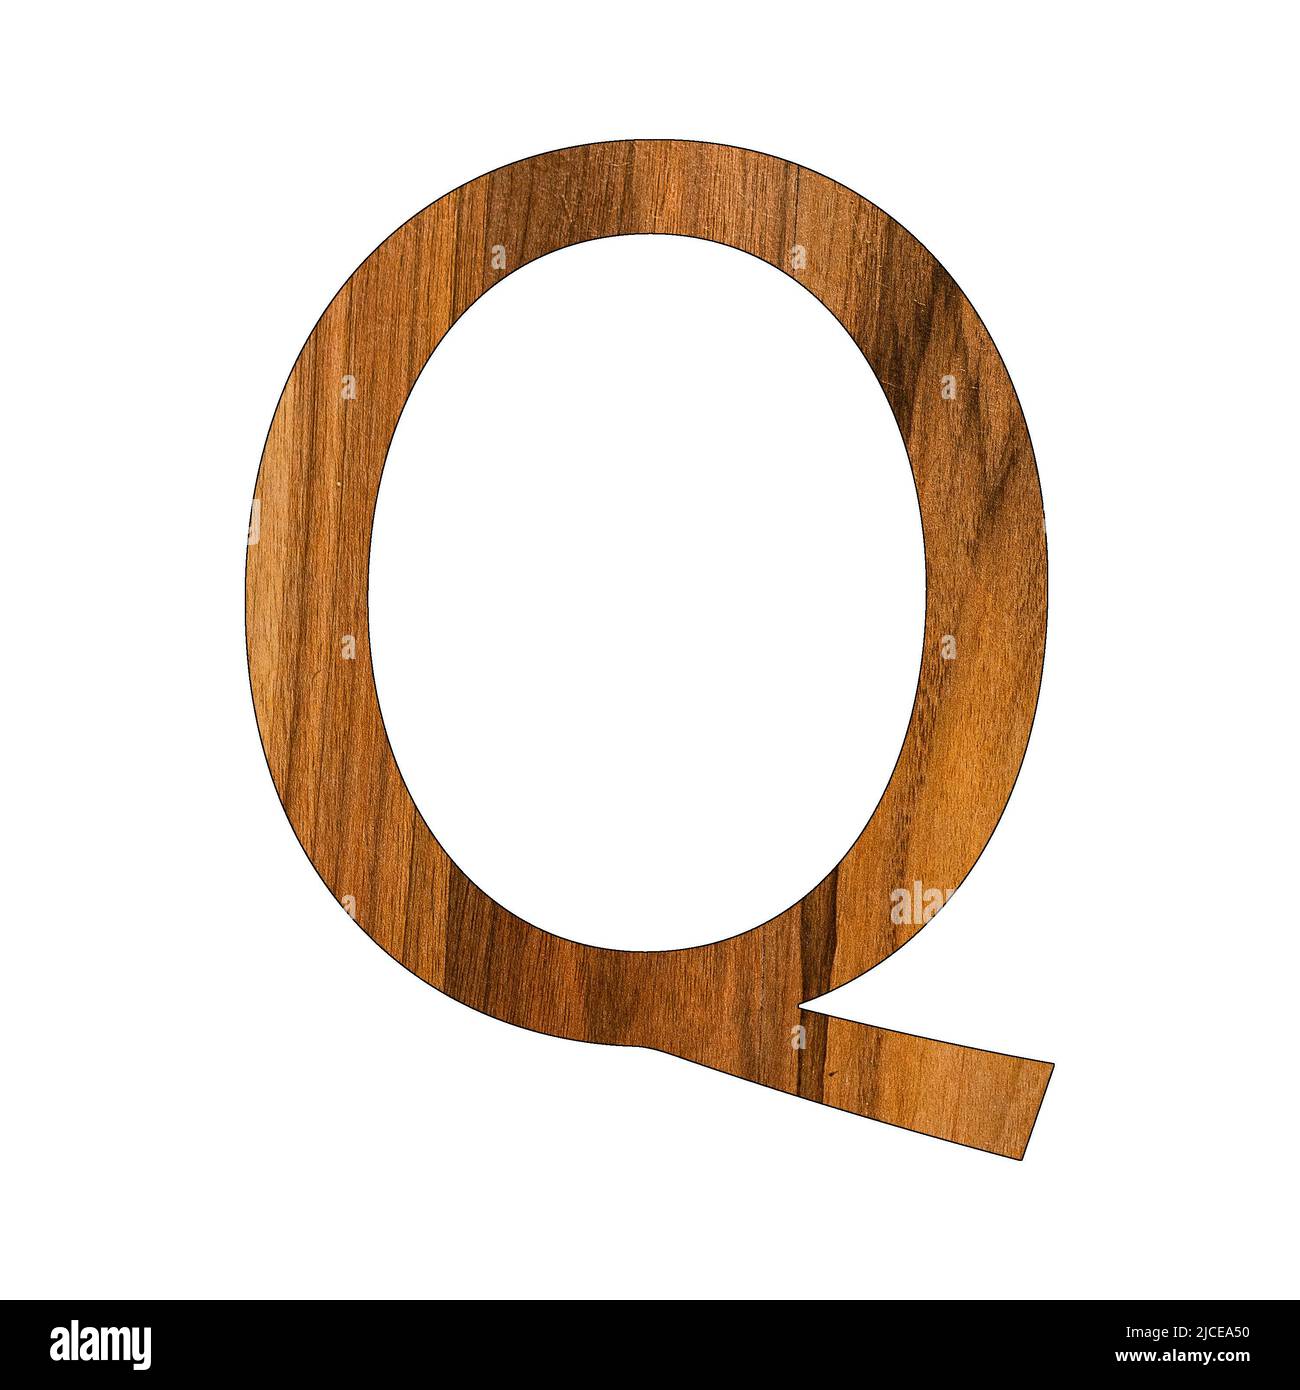 Uppercase letter Q - wood texture - white background Stock Photo